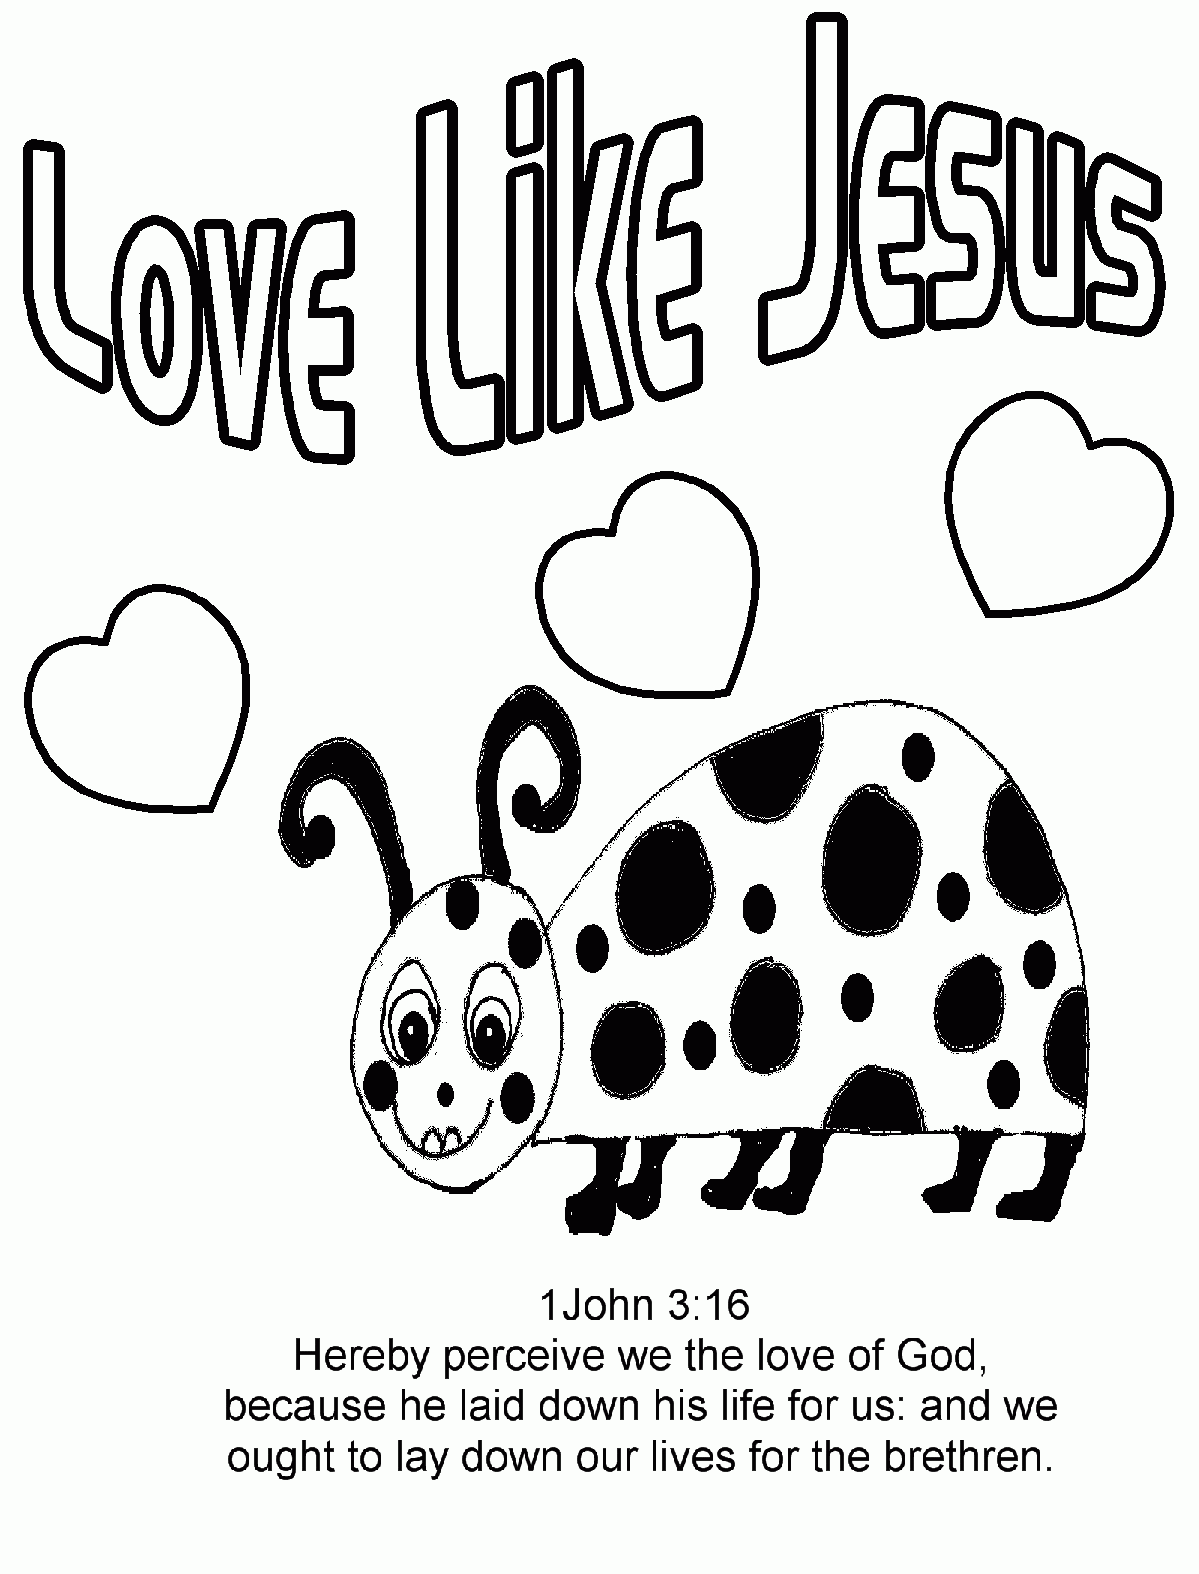 A Heart Like Jesus Coloring Page - Coloring Pages For All Ages